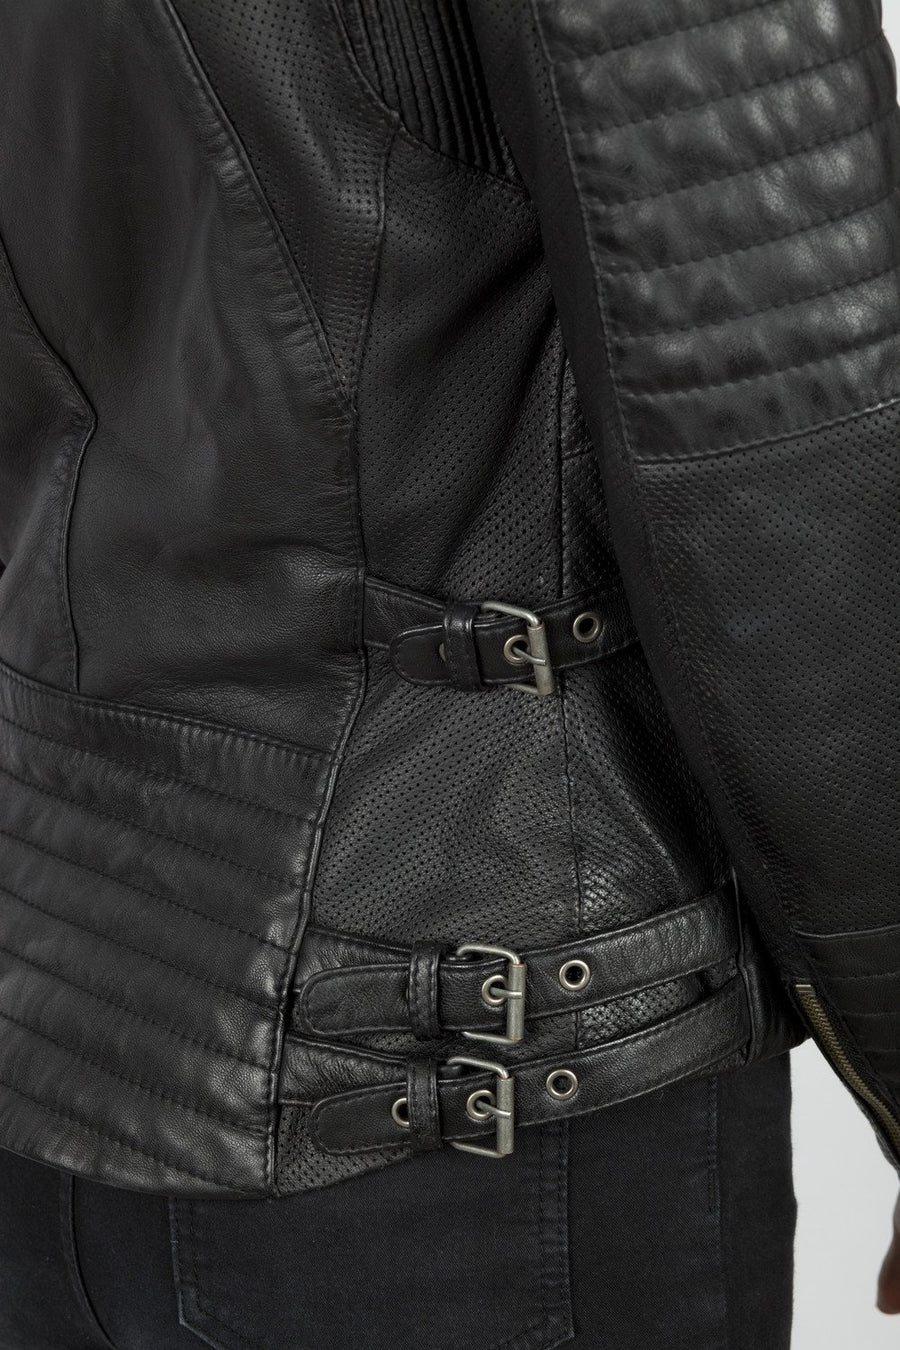 Waist adjustment stripes of the Women&#39;s black leather motorcycle jacket modern classic style from Black arrow label